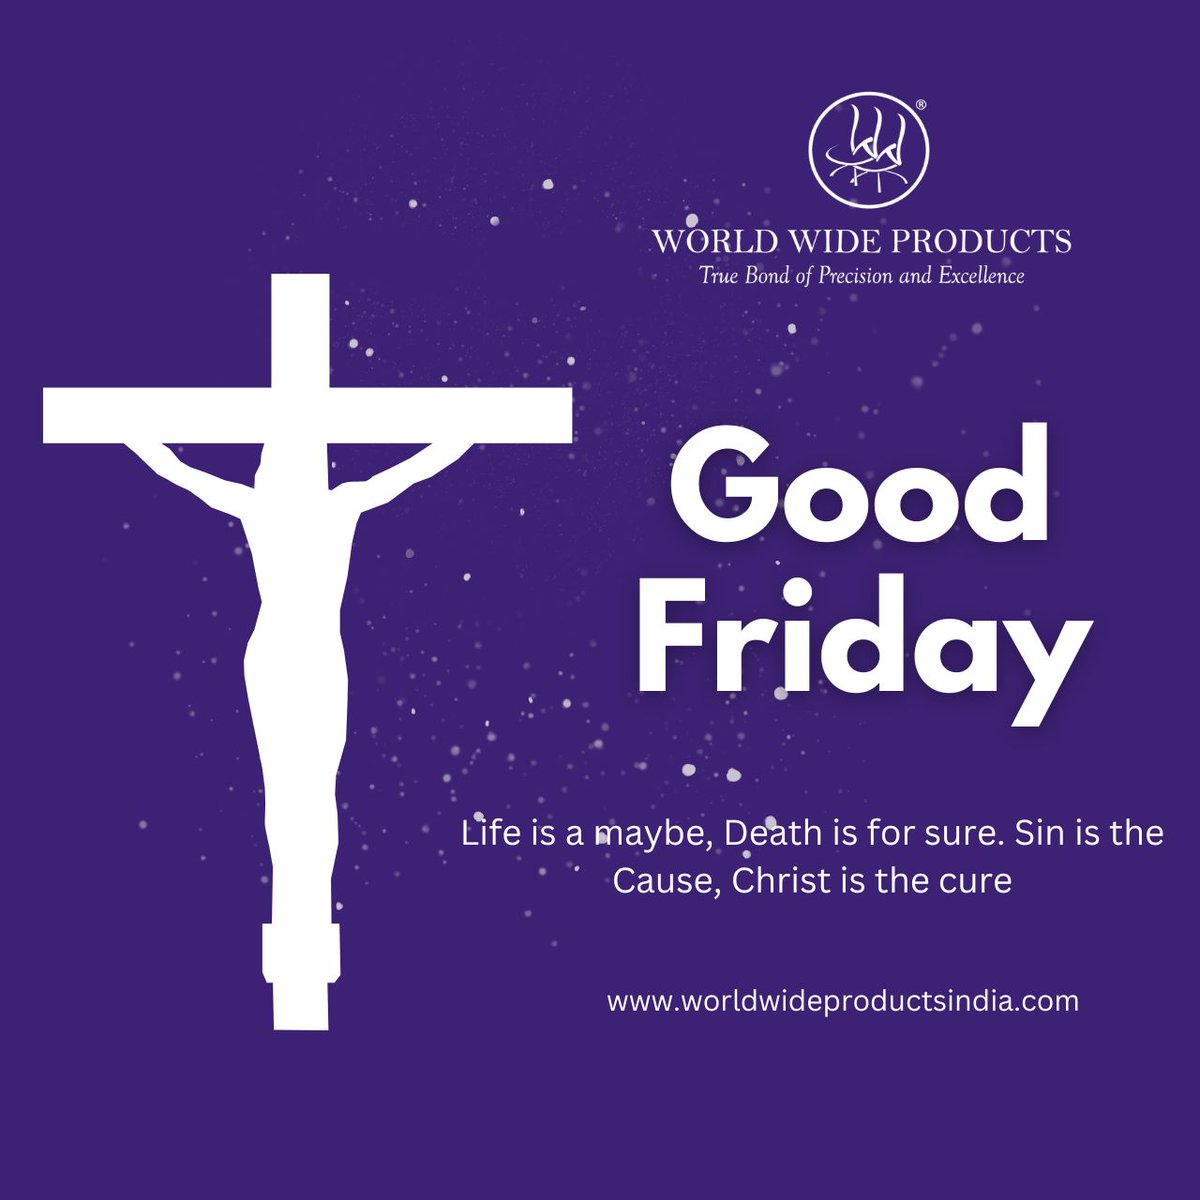 Christ has not only spoken to us by her life but has also spoken for us by his death.
#worldwideproductsindia #manufacturer #chairparts #goodfriday #happygoodfriday #yeshumasih #goodfriday #easter #jesus #jumatagung #love #happyeaster #friday  #jesuschrist #goodfriday2023